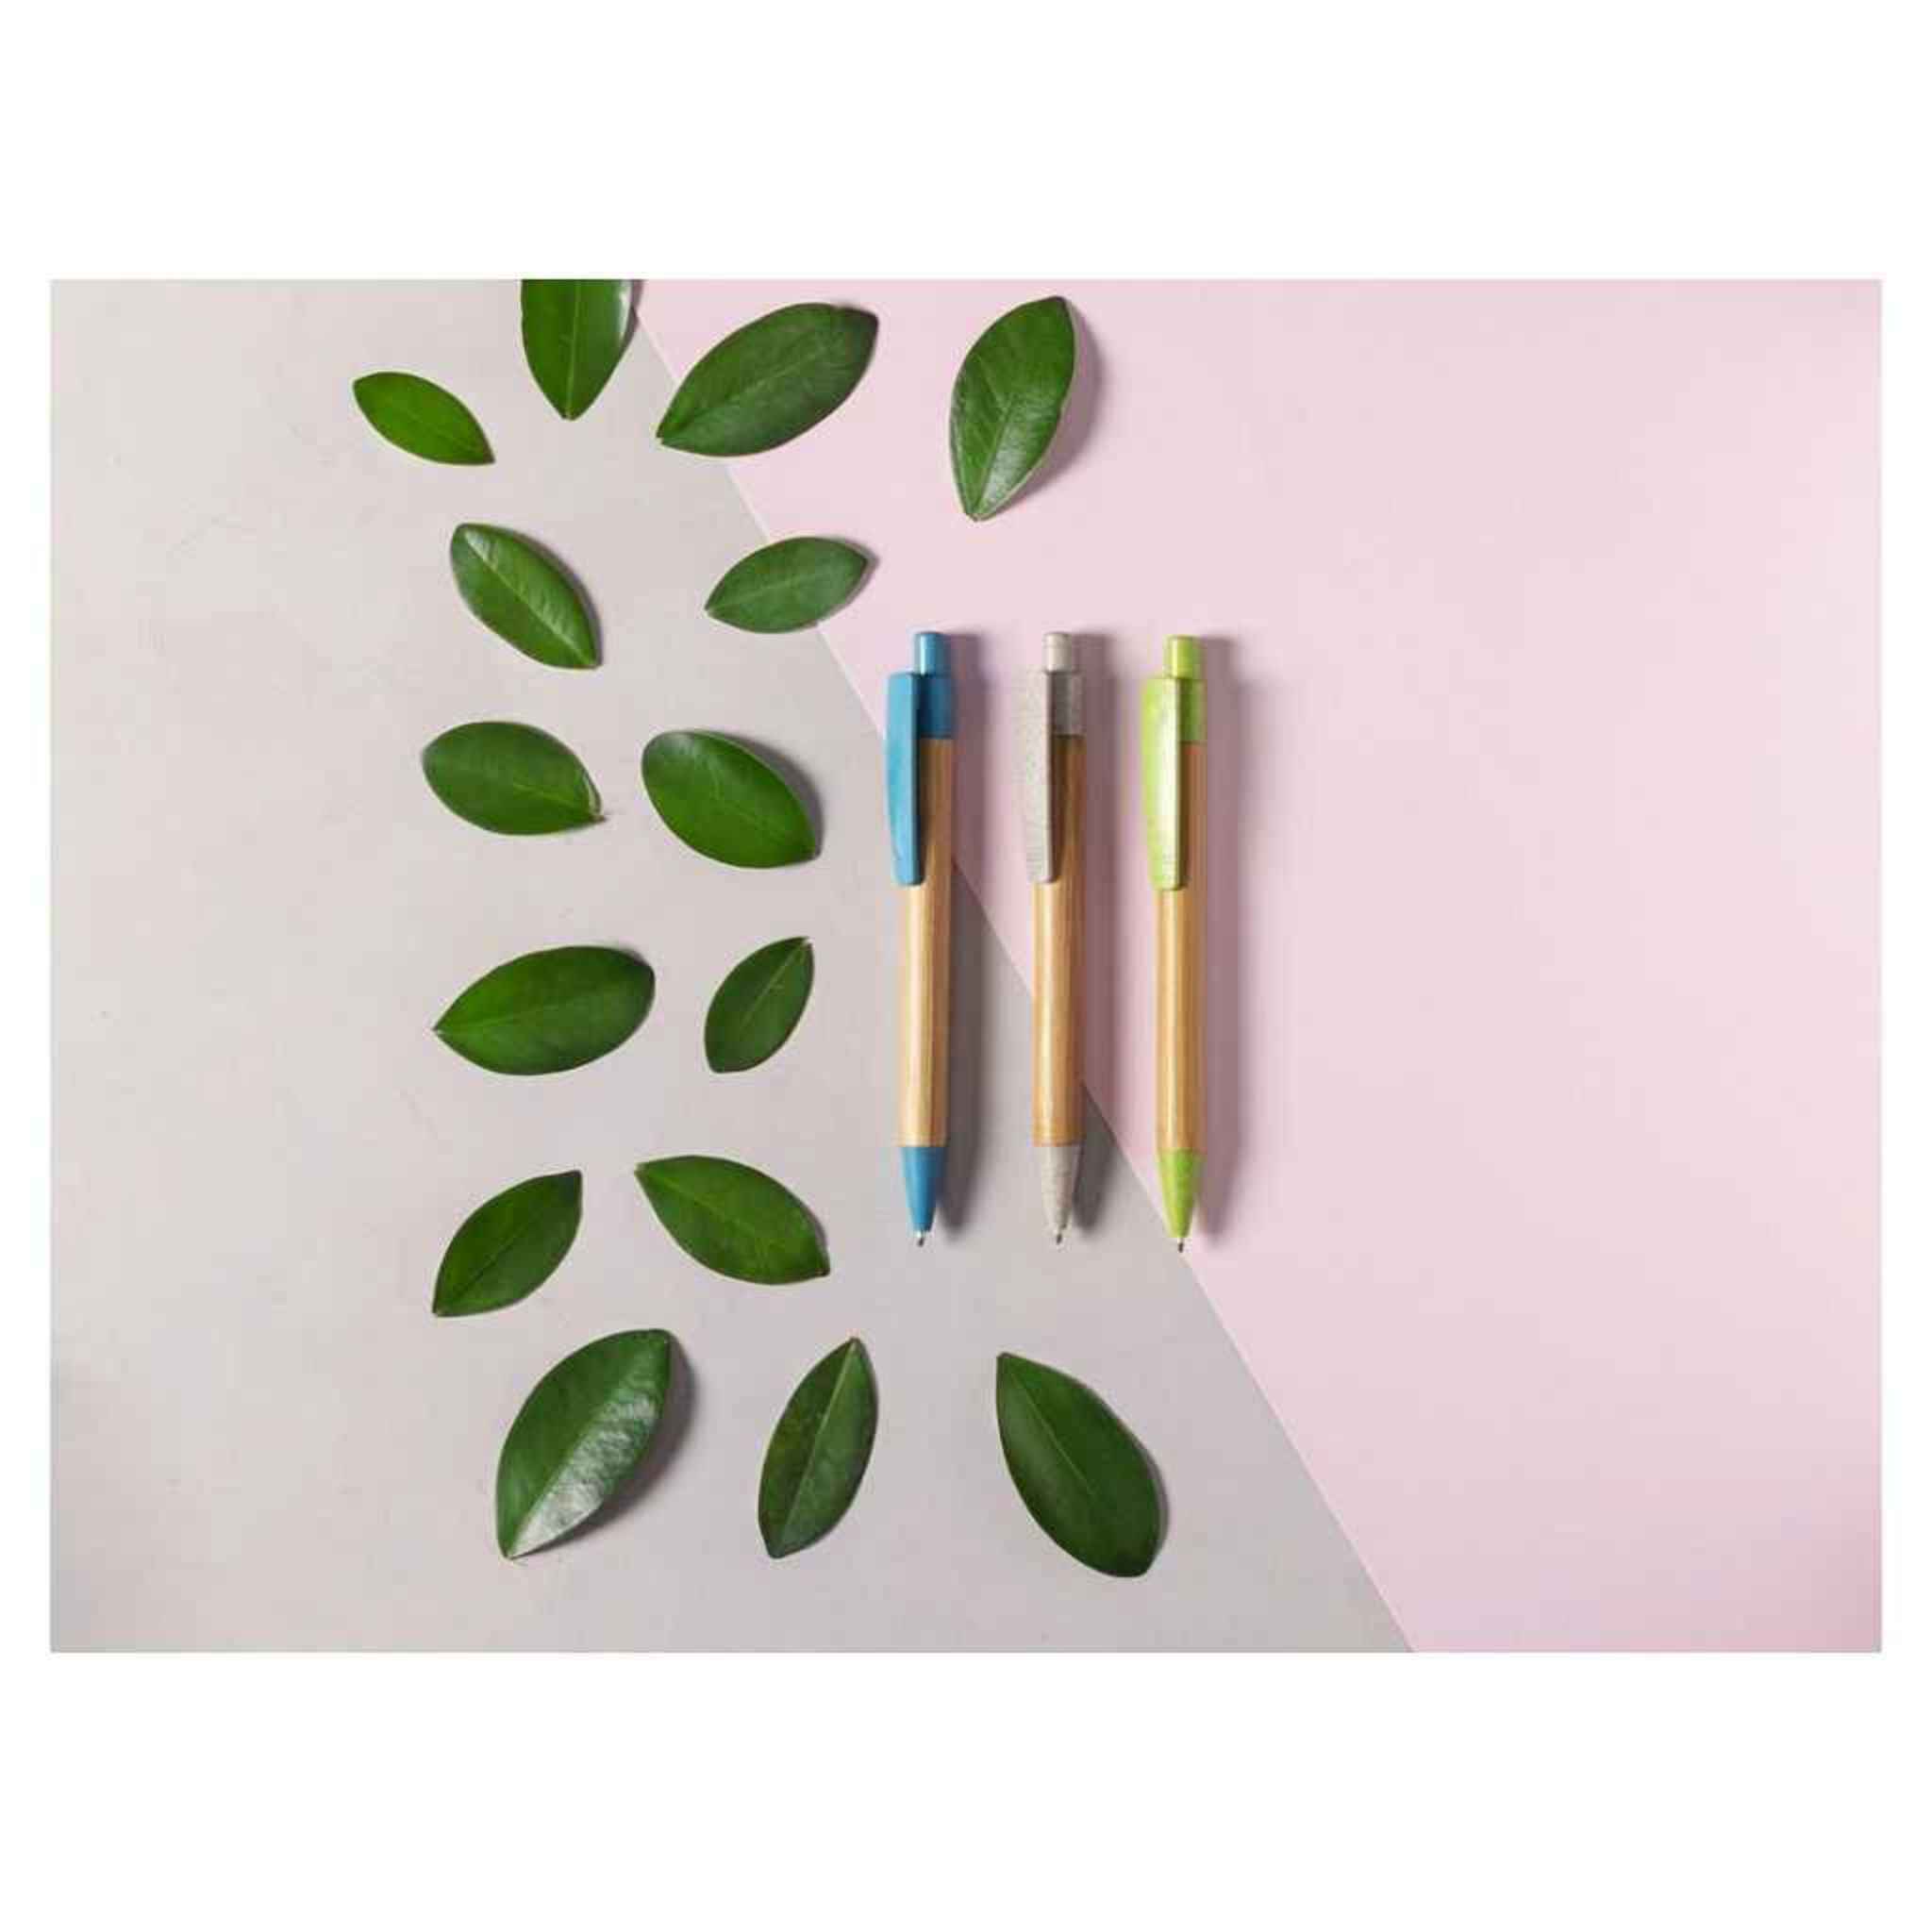 Bamboo Wheat Straw Pens in Eco-Neutral theme